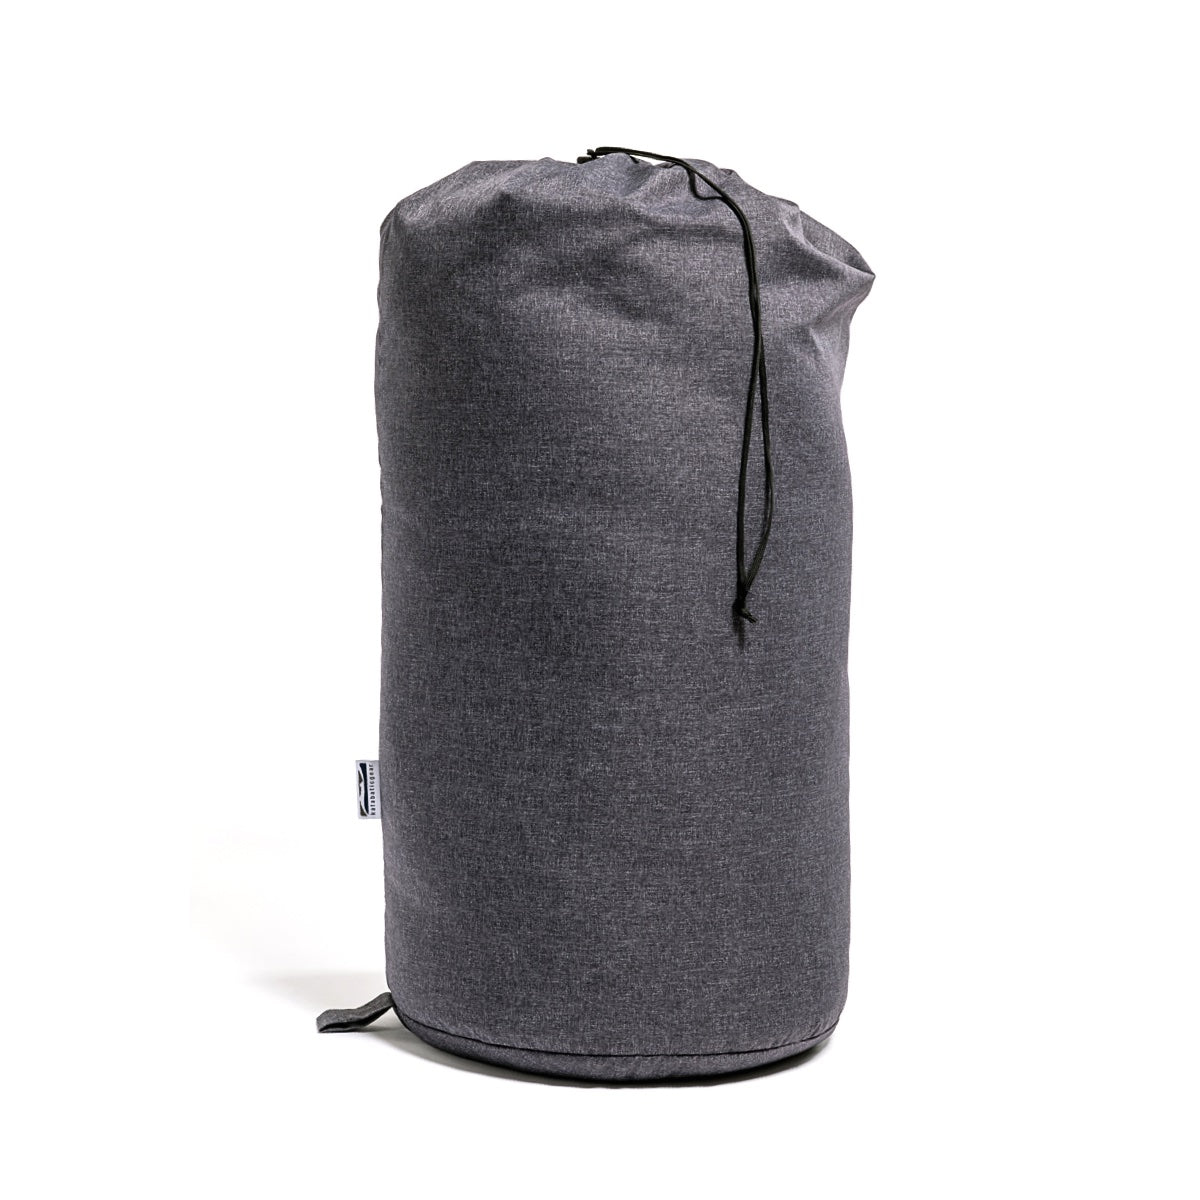 The BlissTotes Clothing Storage Bags Are 56% Off at